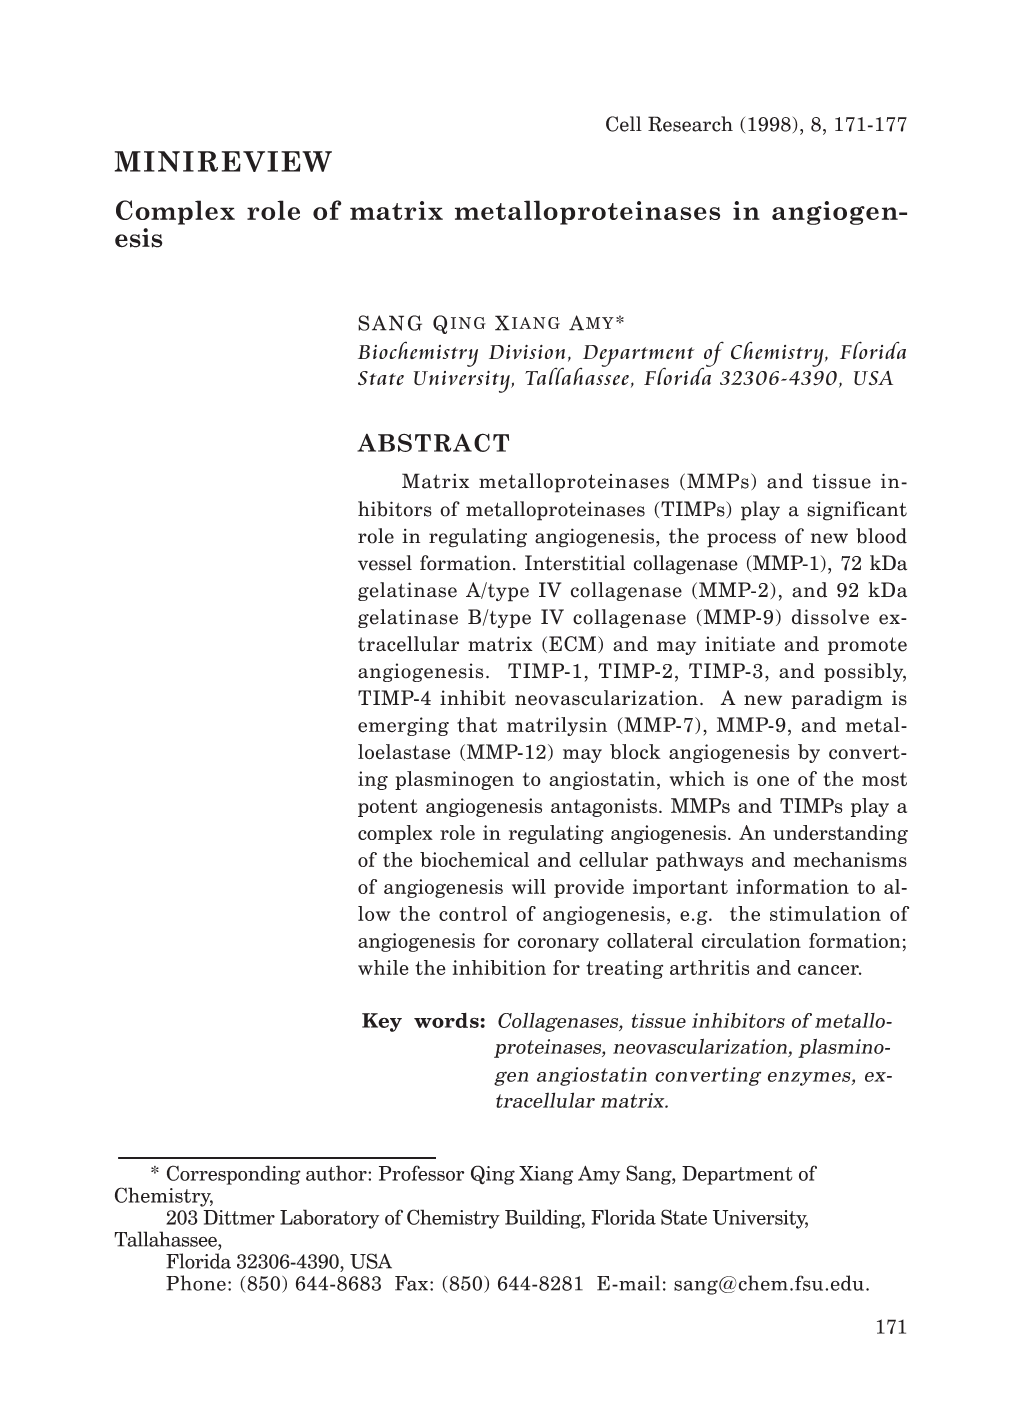 MINIREVIEW Complex Role of Matrix Metalloproteinases in Angiogen- Esis